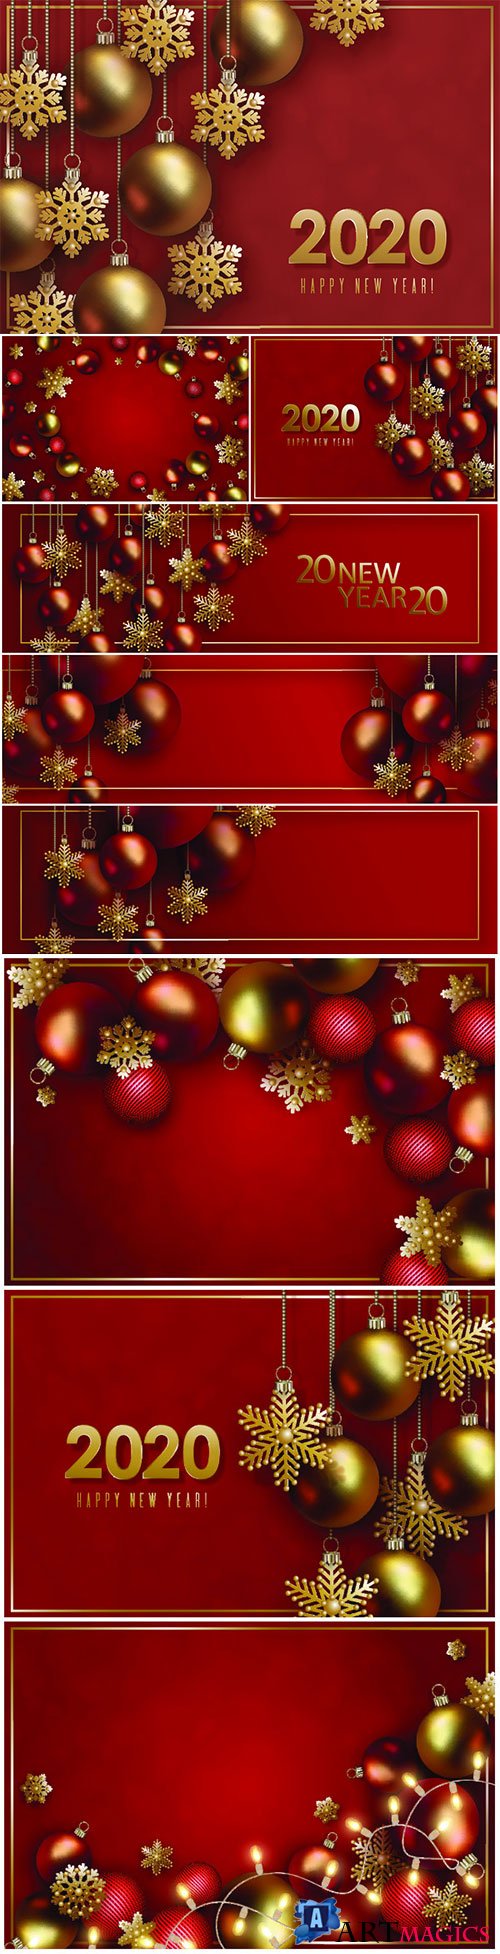 Christmas and 2020 New Year design, 3D red realistic christmas balls